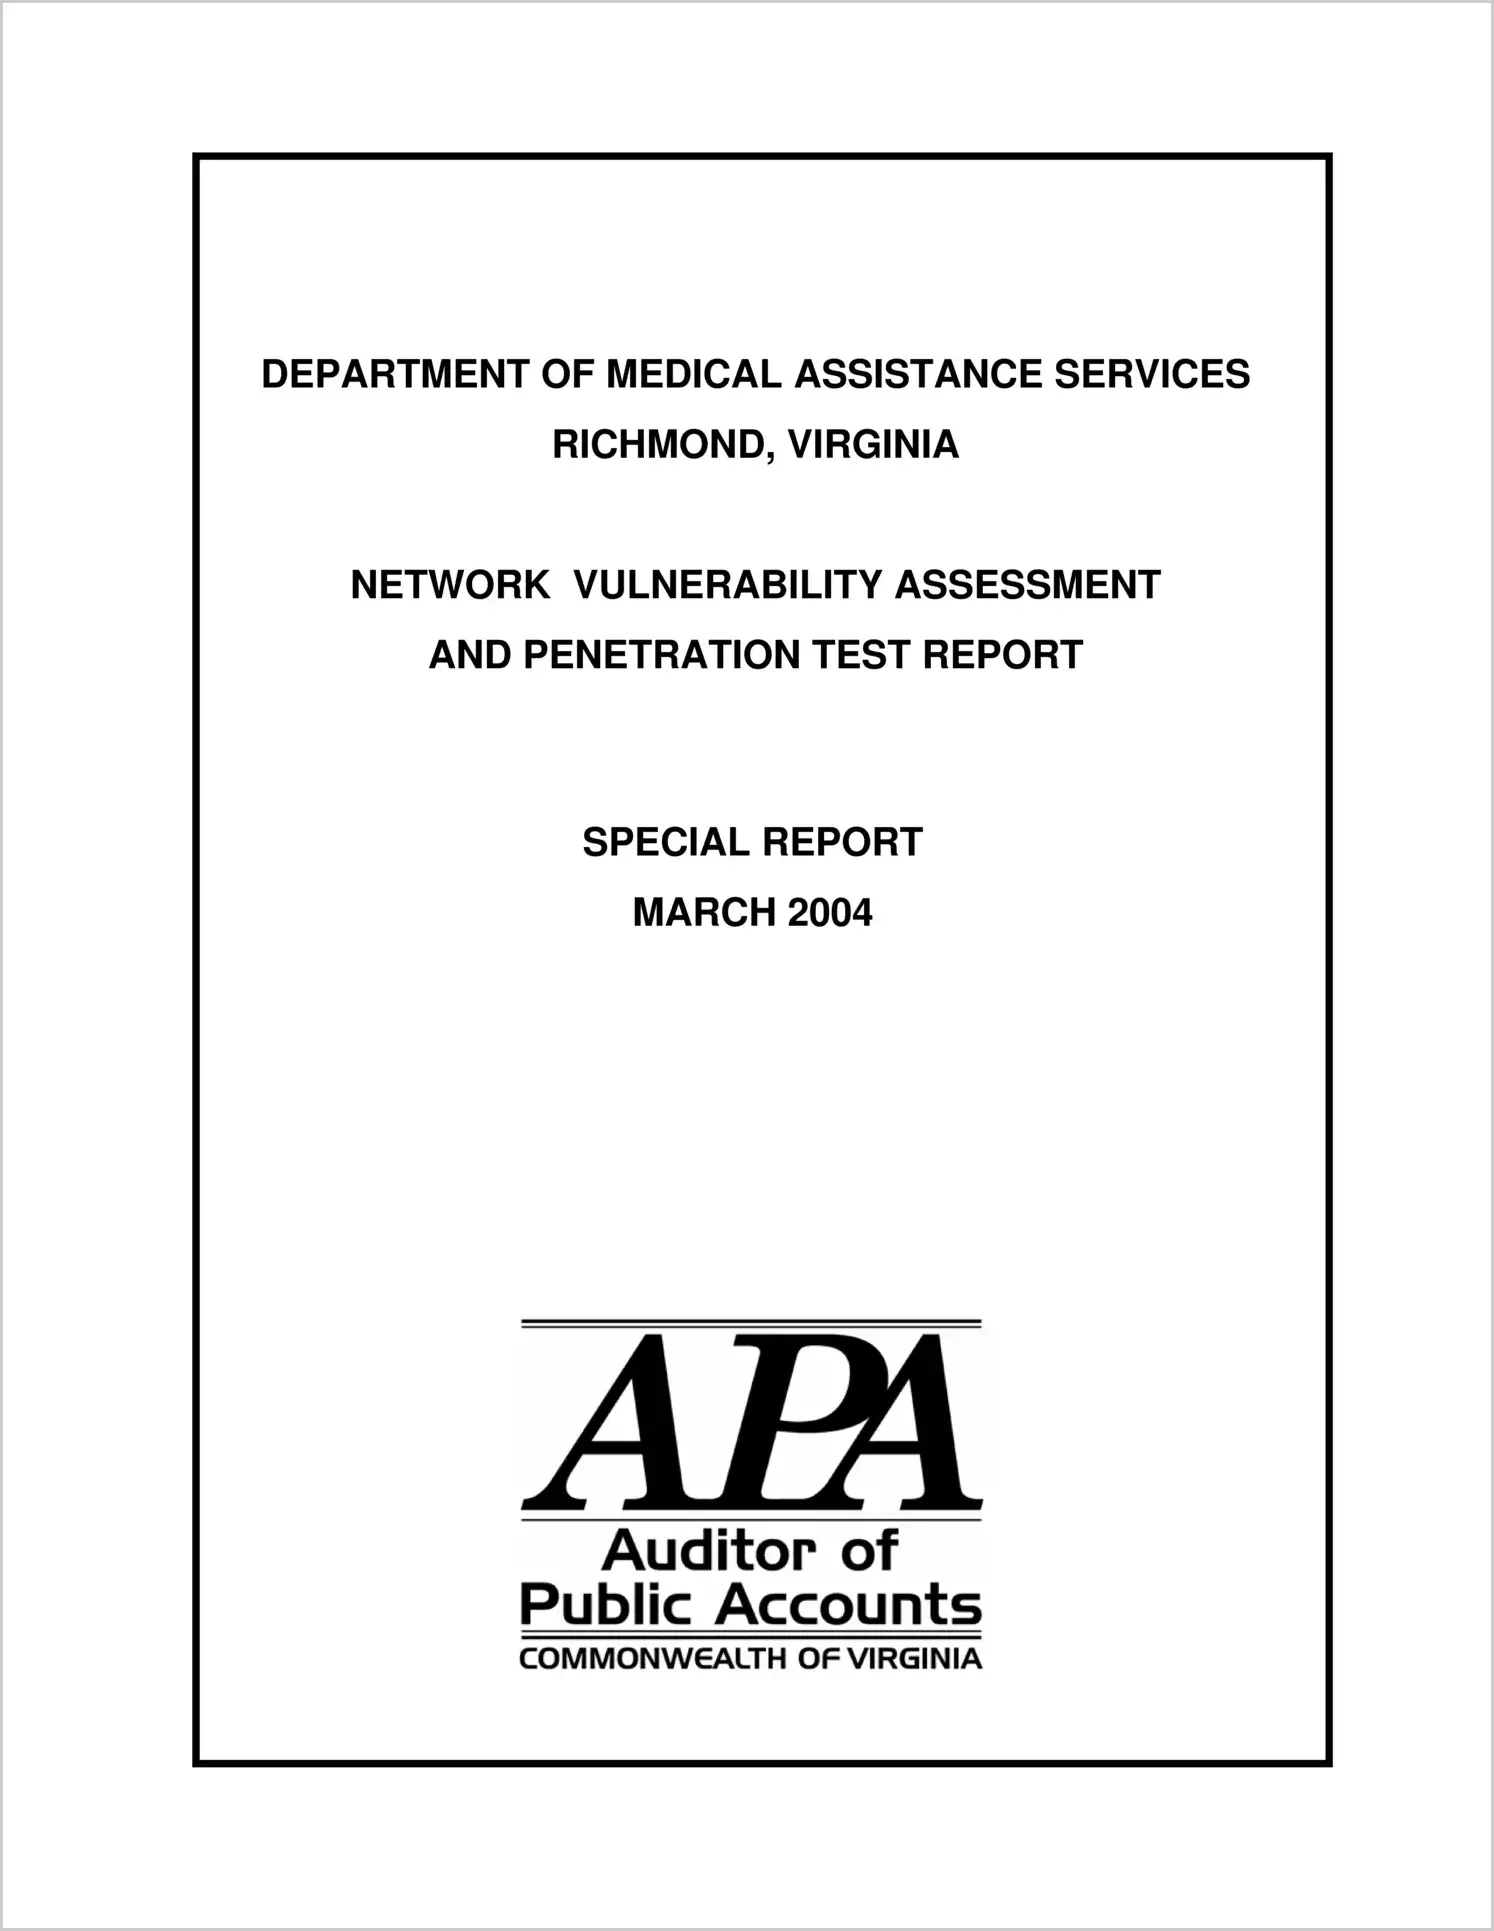 Special ReportDepartment of Medical Assistance Services, Network Vulnerability Assessment and Penetration Test Report as of March 2004(Report Date: 3/2004)